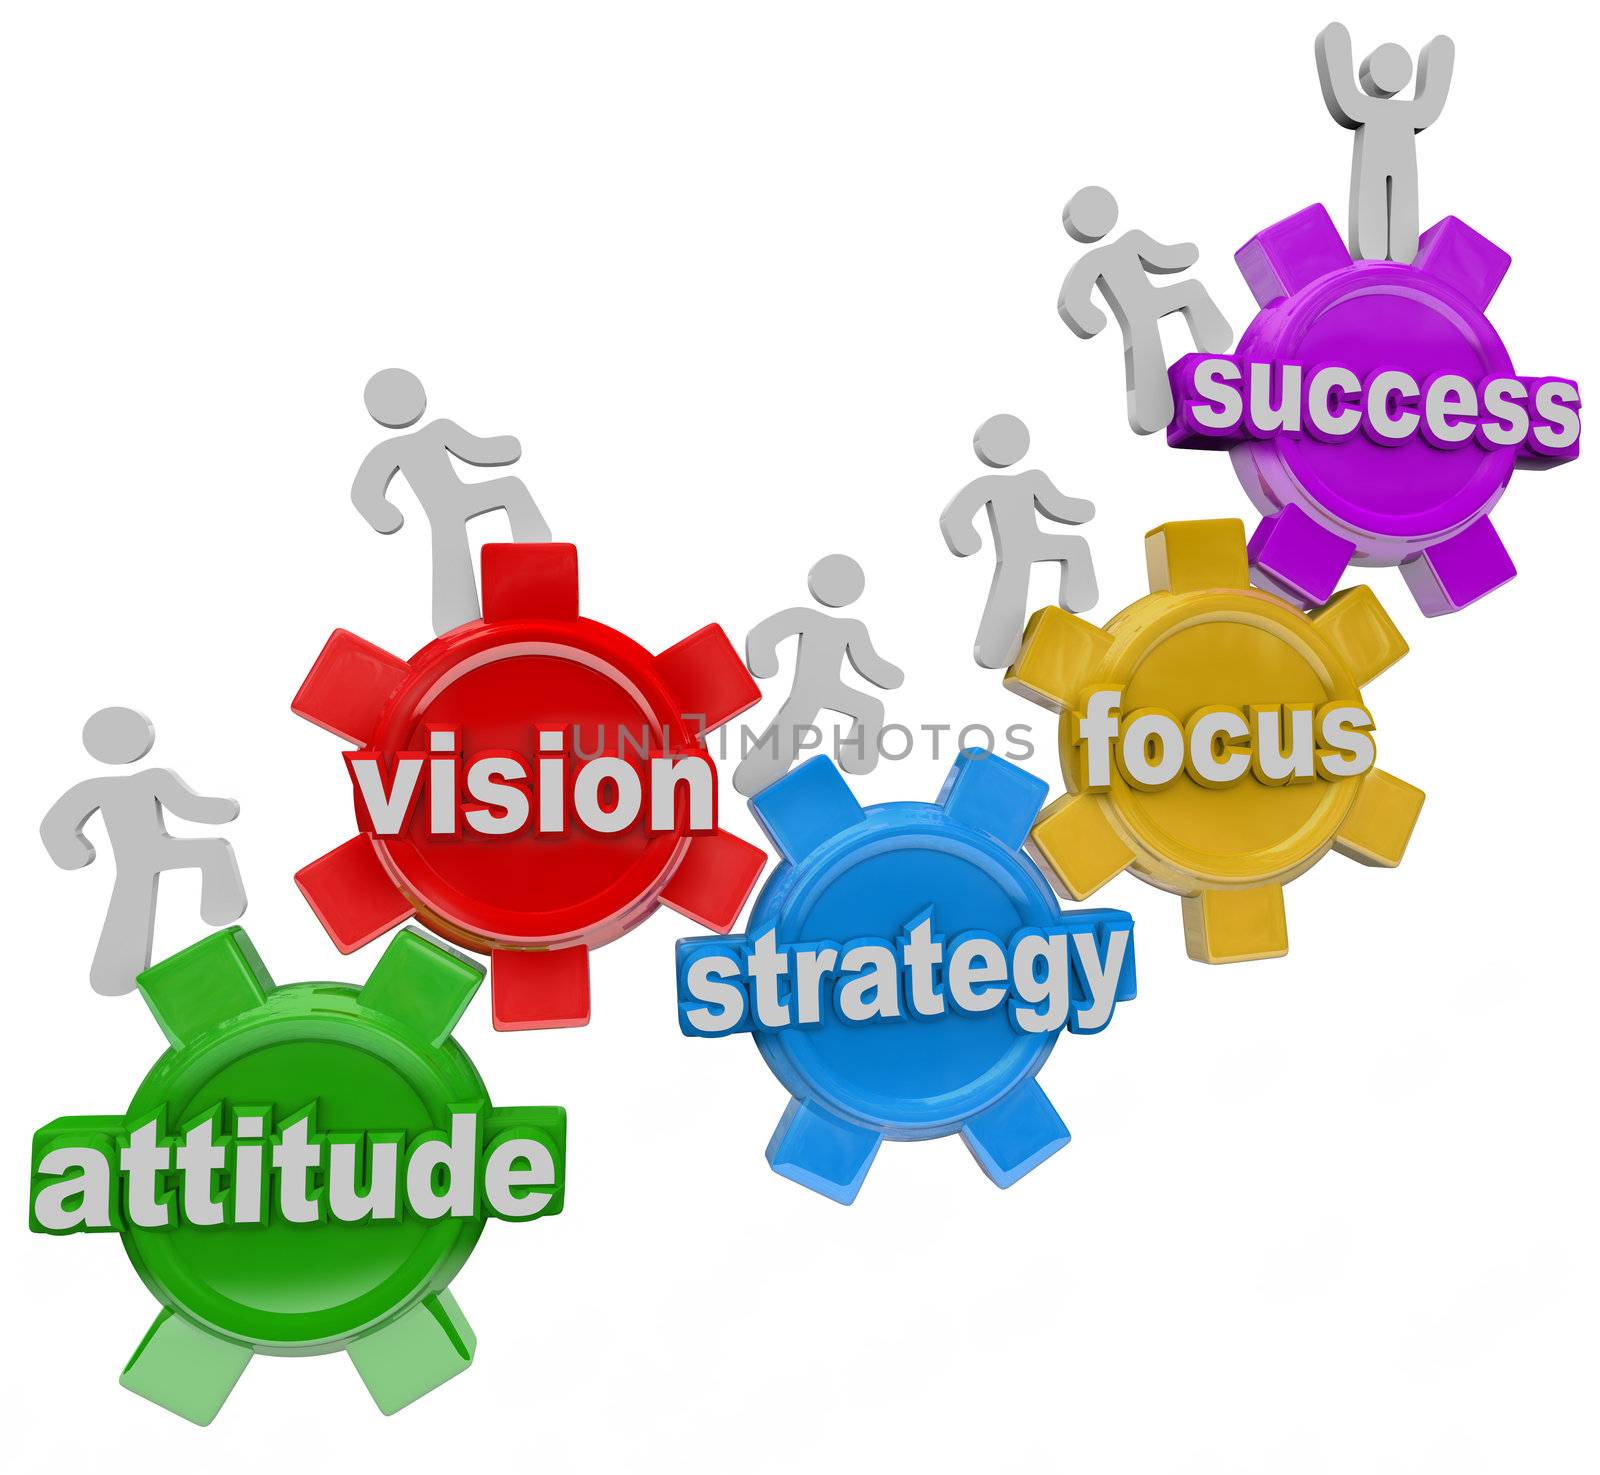 A team of people walking upward on connected gears with the words Attitude, Vision, Strategy, Focus and Success symbolizing the elements necessary to achieve a goal and be successful in business or life